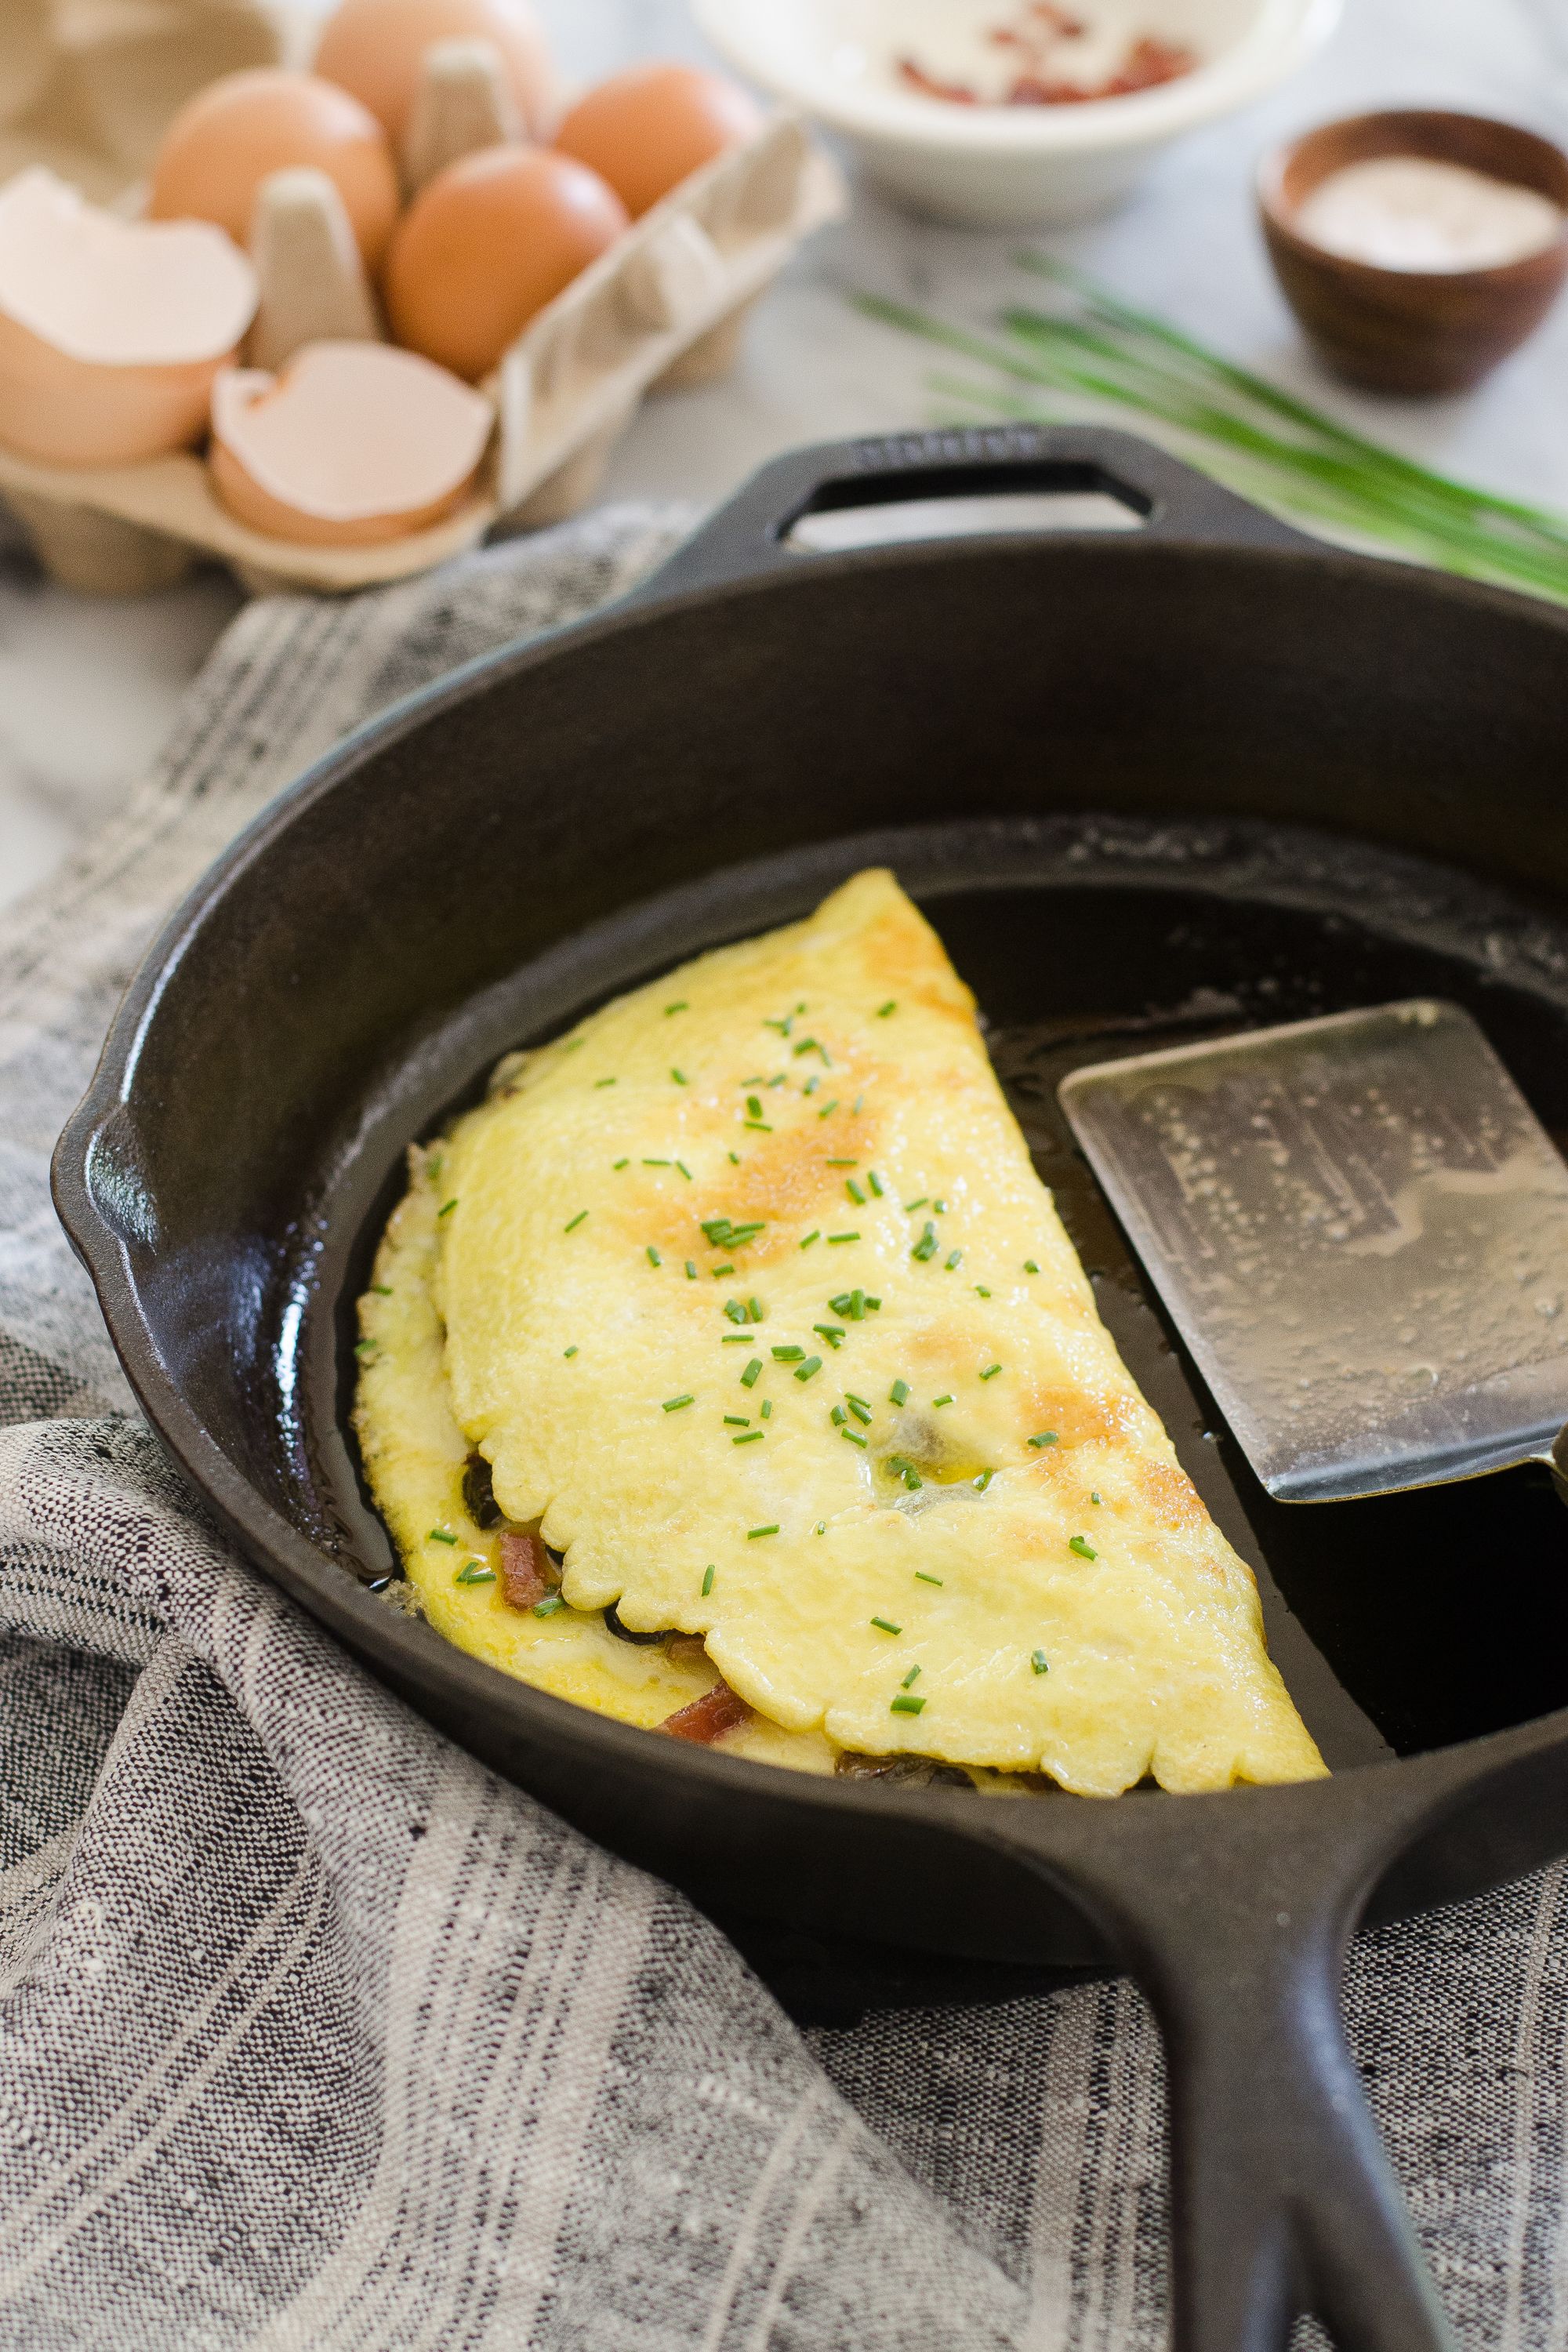 https://hips.hearstapps.com/thepioneerwoman/wp-content/uploads/2016/10/how-to-make-an-omelette-14.jpg